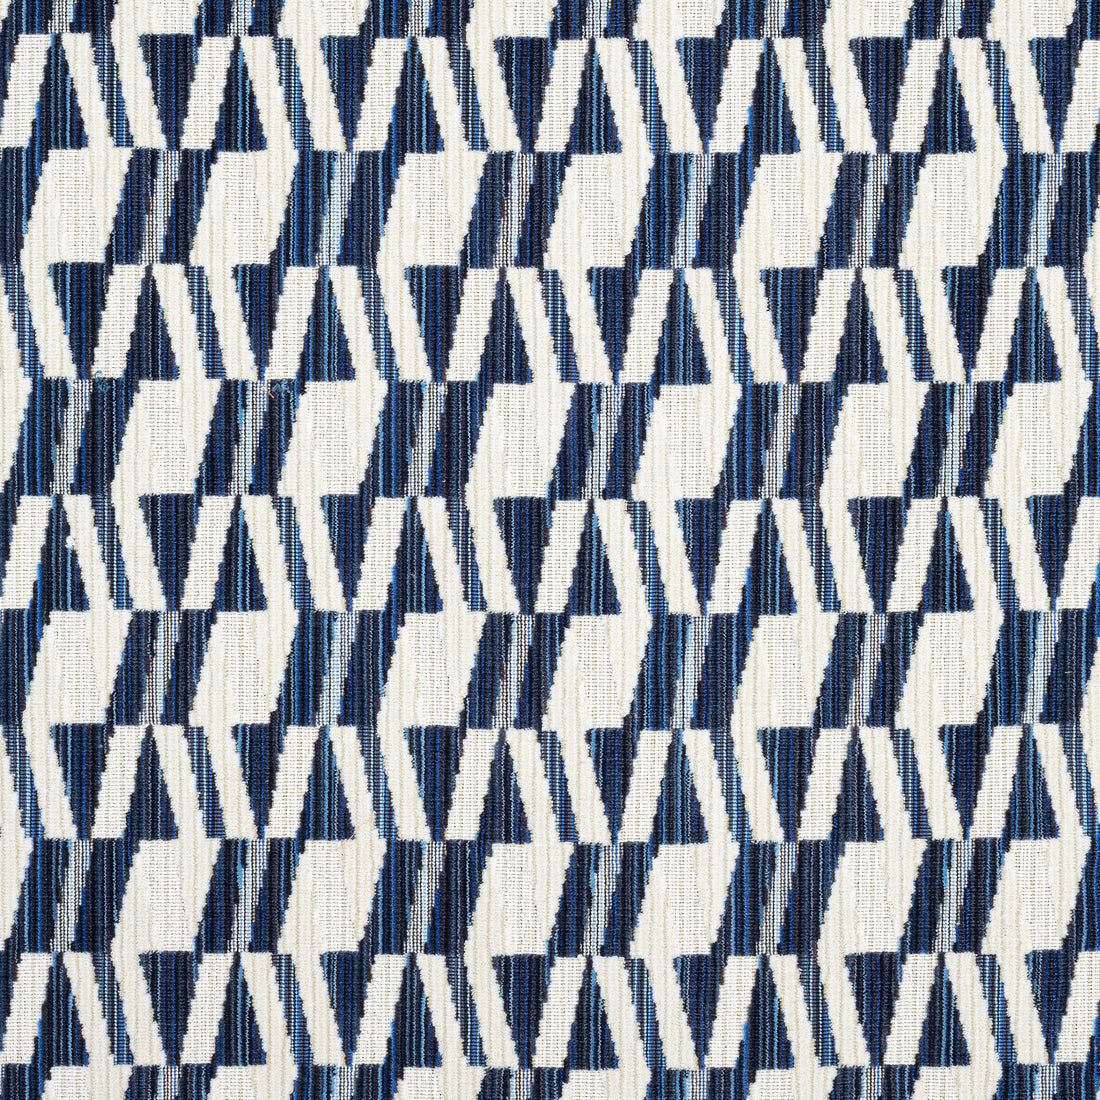 Bossa Nova Velvet fabric in navy color - pattern number W72811 - by Thibaut in the Woven Resource 13: Fusion Velvets collection